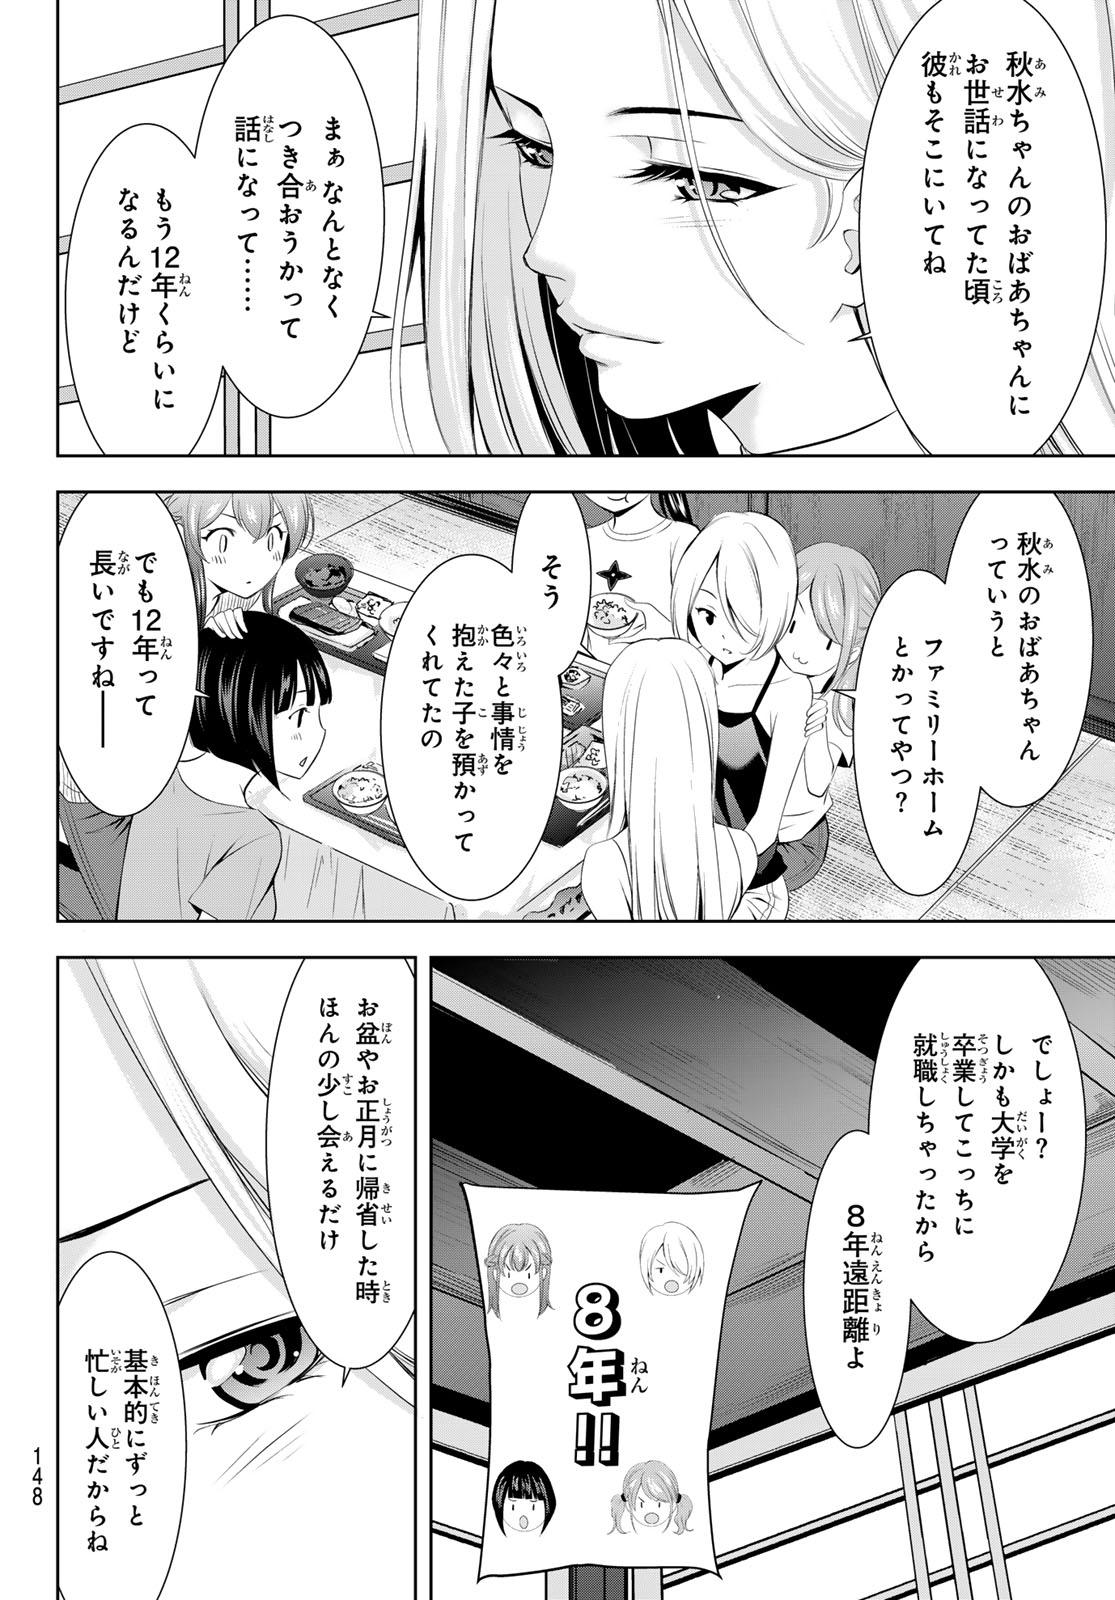 Megami no Cafe Terace - Chapter 151 - Page 5